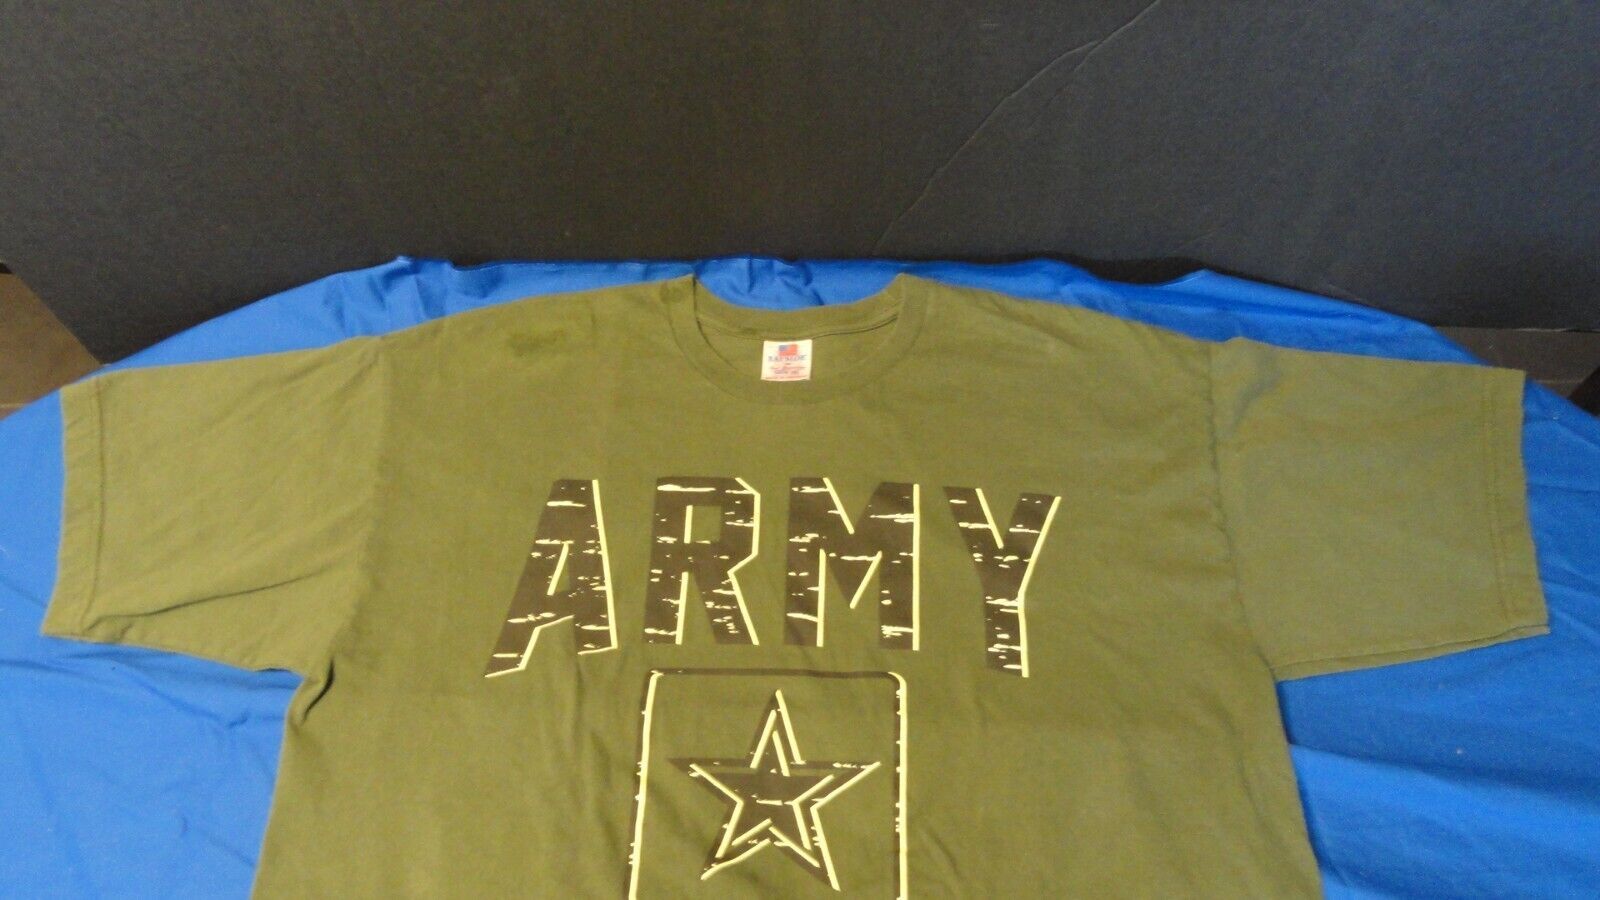 DISCONTINUED BAYSIDE US ARMY GREEN  T-SHIRT XL MADE IN THE USA - $21.05